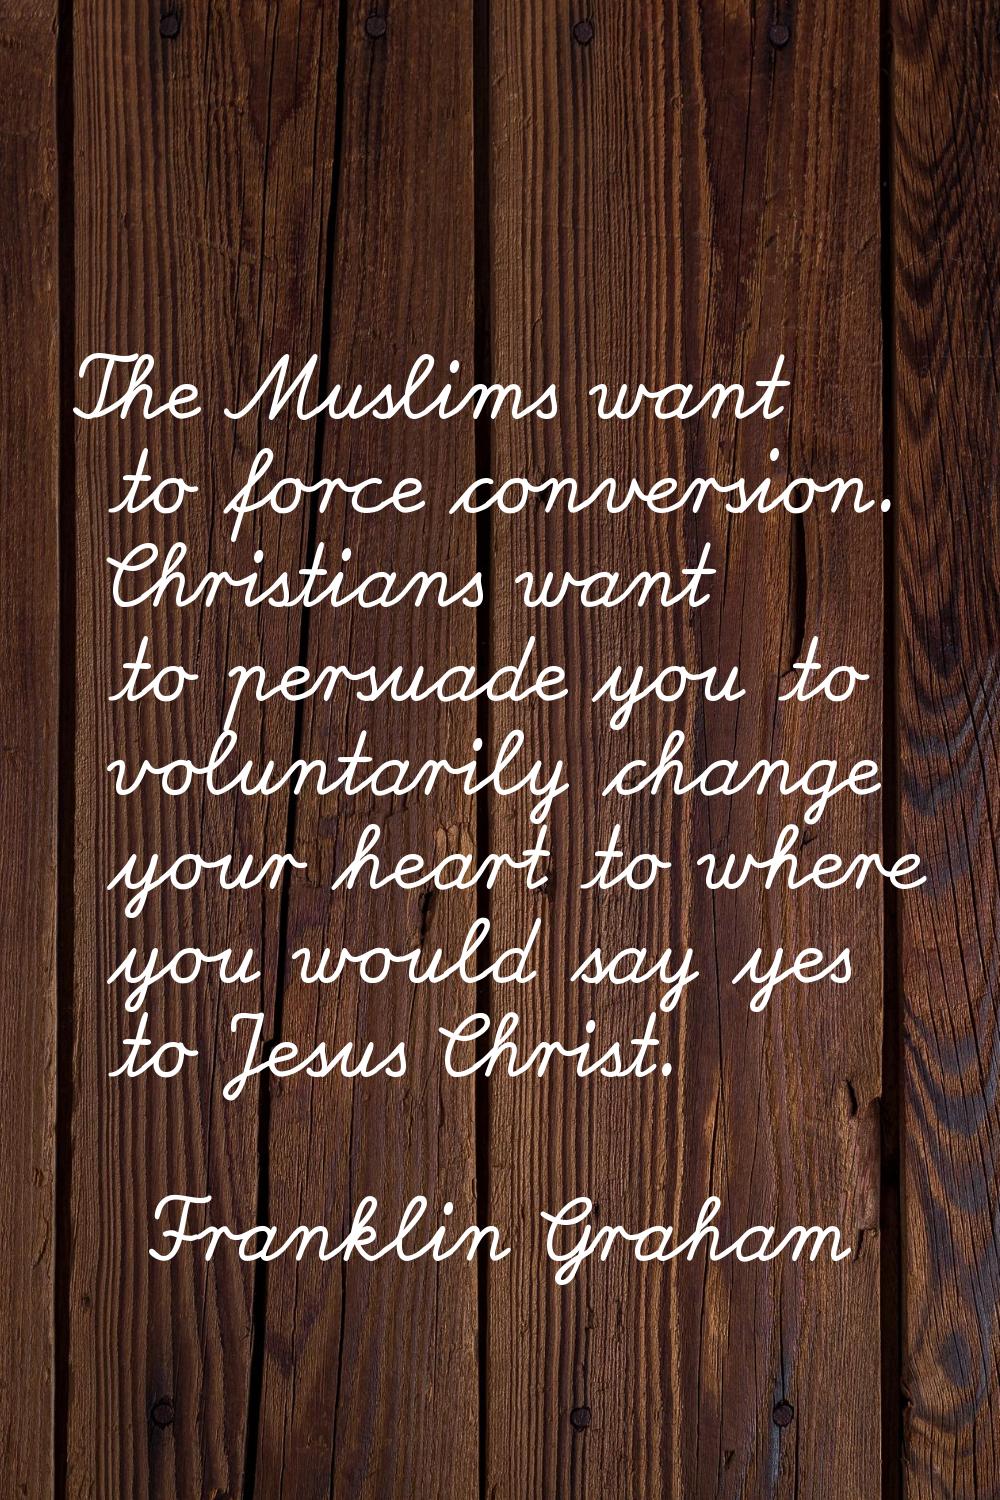 The Muslims want to force conversion. Christians want to persuade you to voluntarily change your he